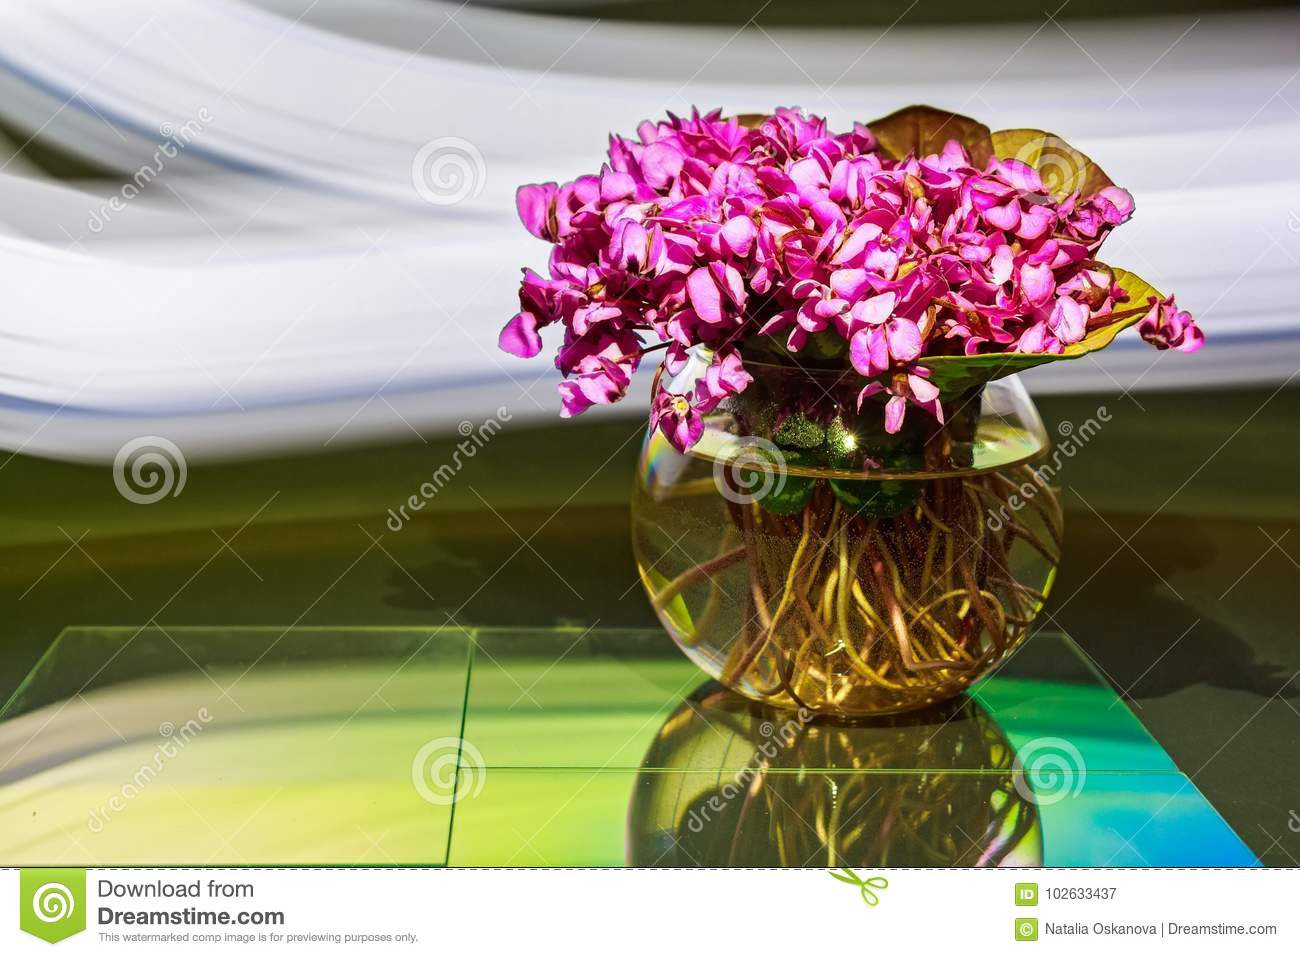 30 Awesome Small Glass Vases for Centerpieces 2024 free download small glass vases for centerpieces of bouquet of violet flowers or viola odorata in bowl stock image intended for bouquet of violet flowers or viola odorata in bowl